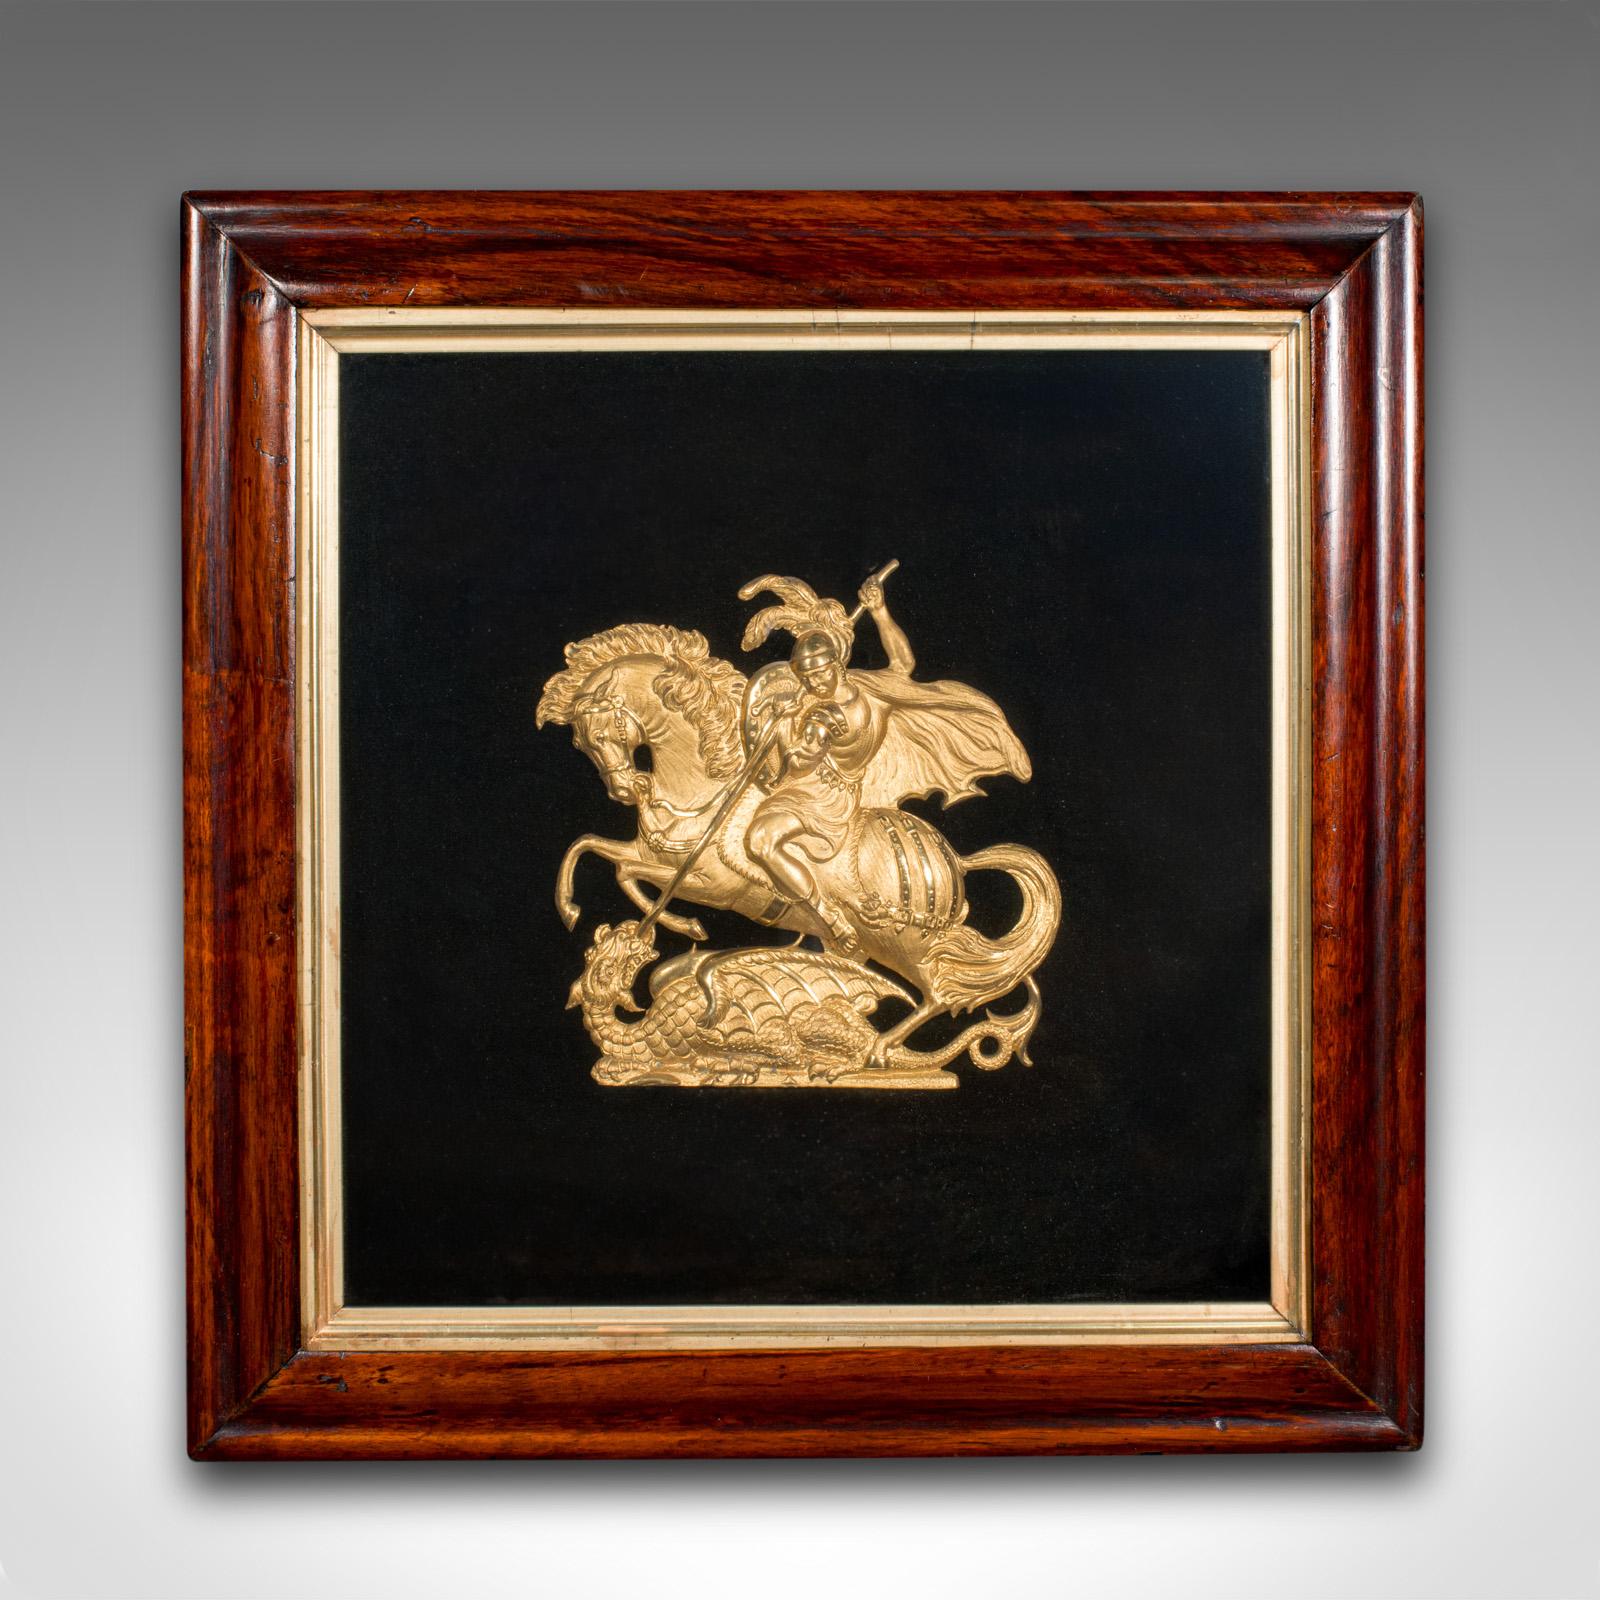 This is an antique George & the Dragon display plaque. An English, gilt metal and beech framed decorative relief, dating to the Regency period and later, circa 1820.

As one of the world's most venerated saints, St George of Lydda - today, South